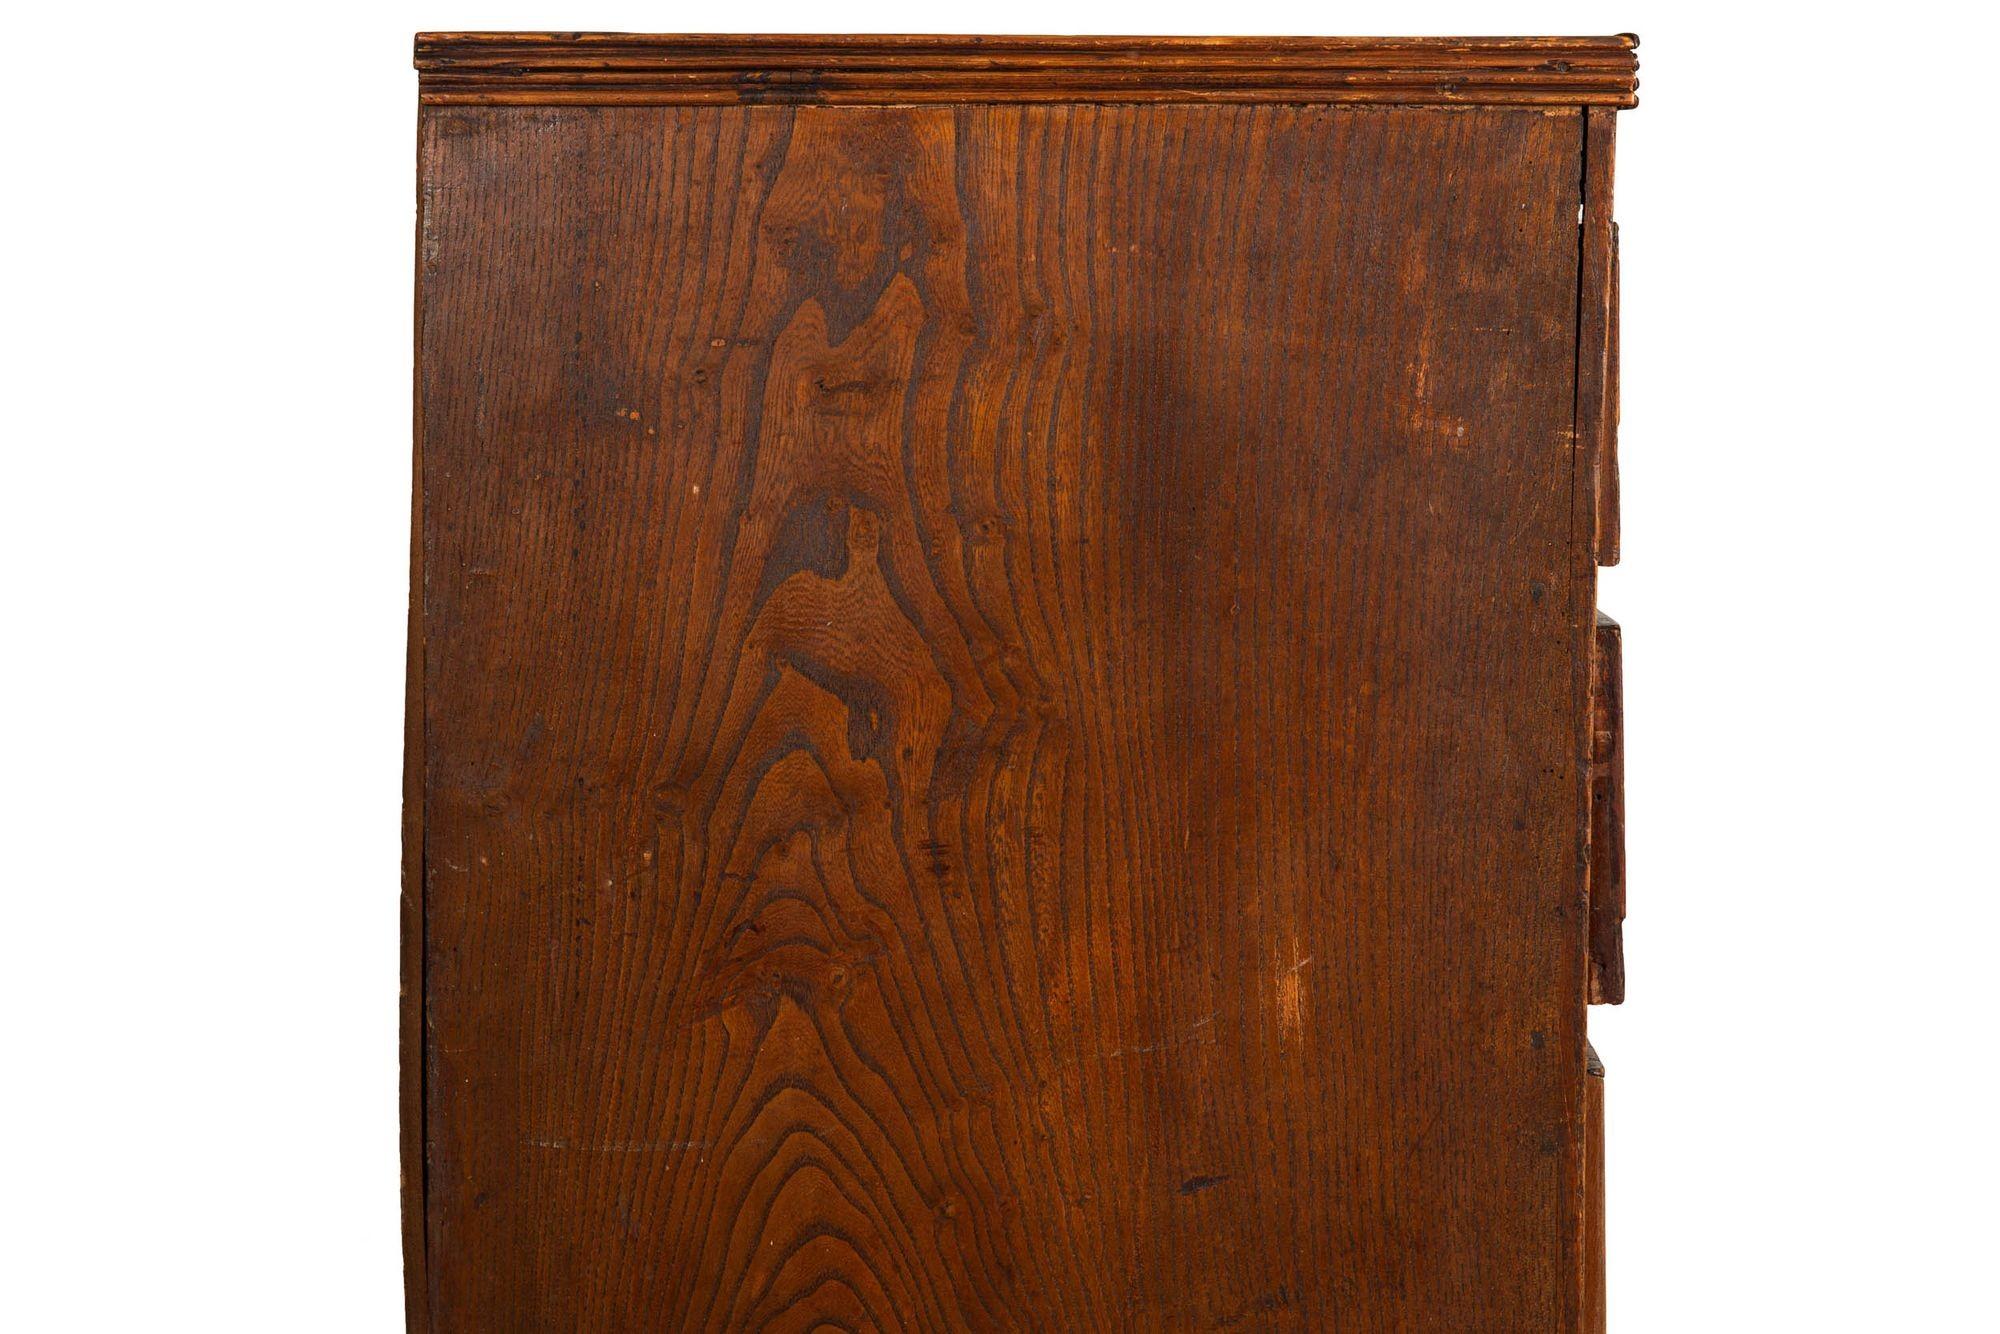 English Antique Patinated Worn Elm Chest of Drawers, Early 19th Century For Sale 6